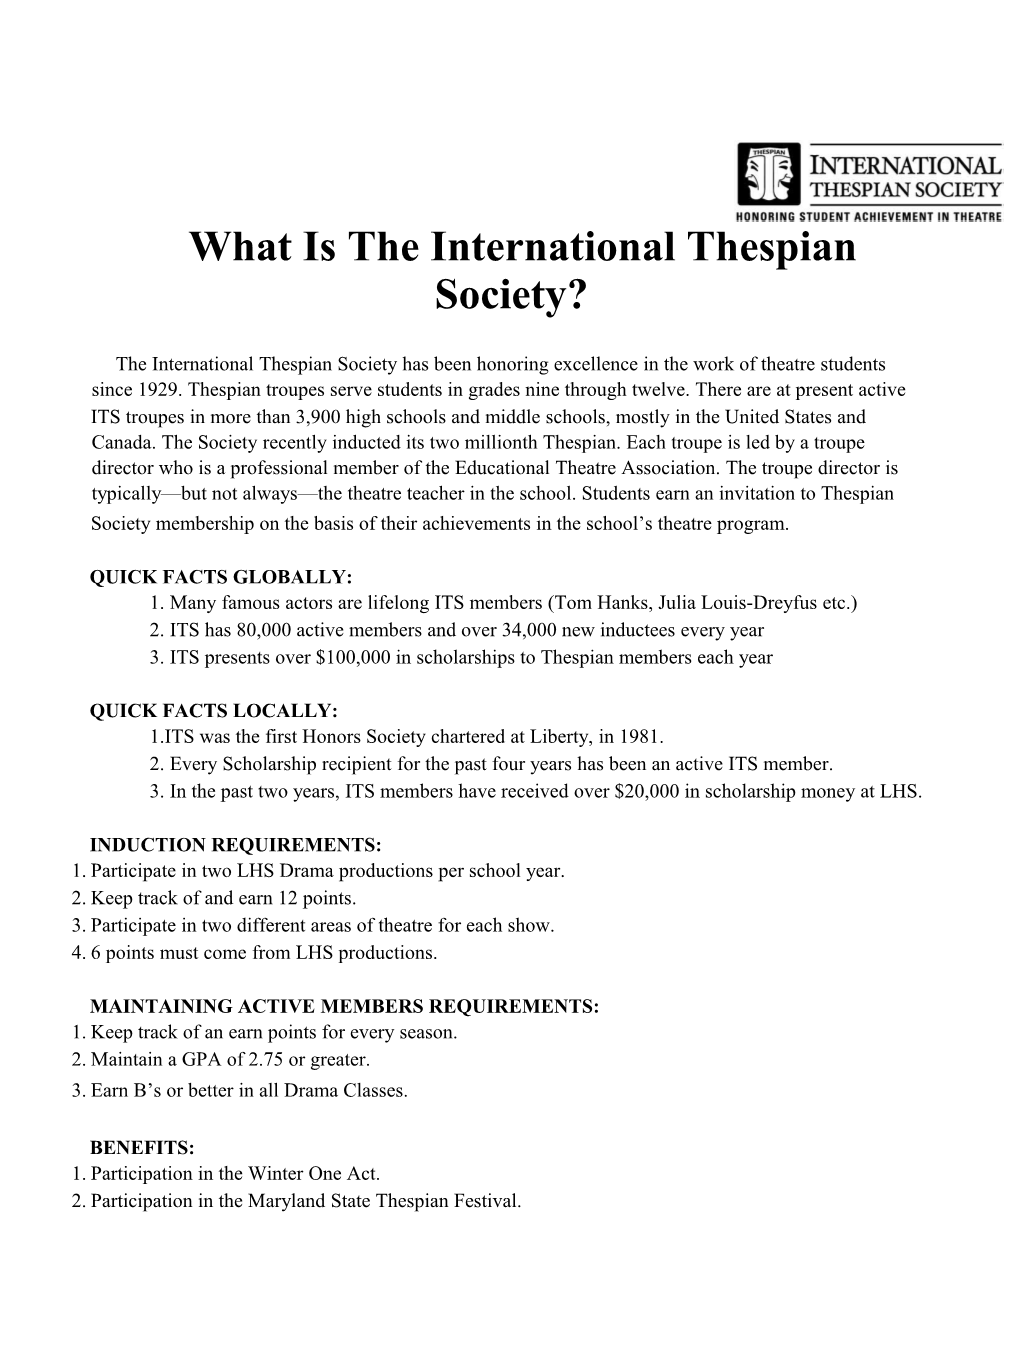 What Is the International Thespian Society?